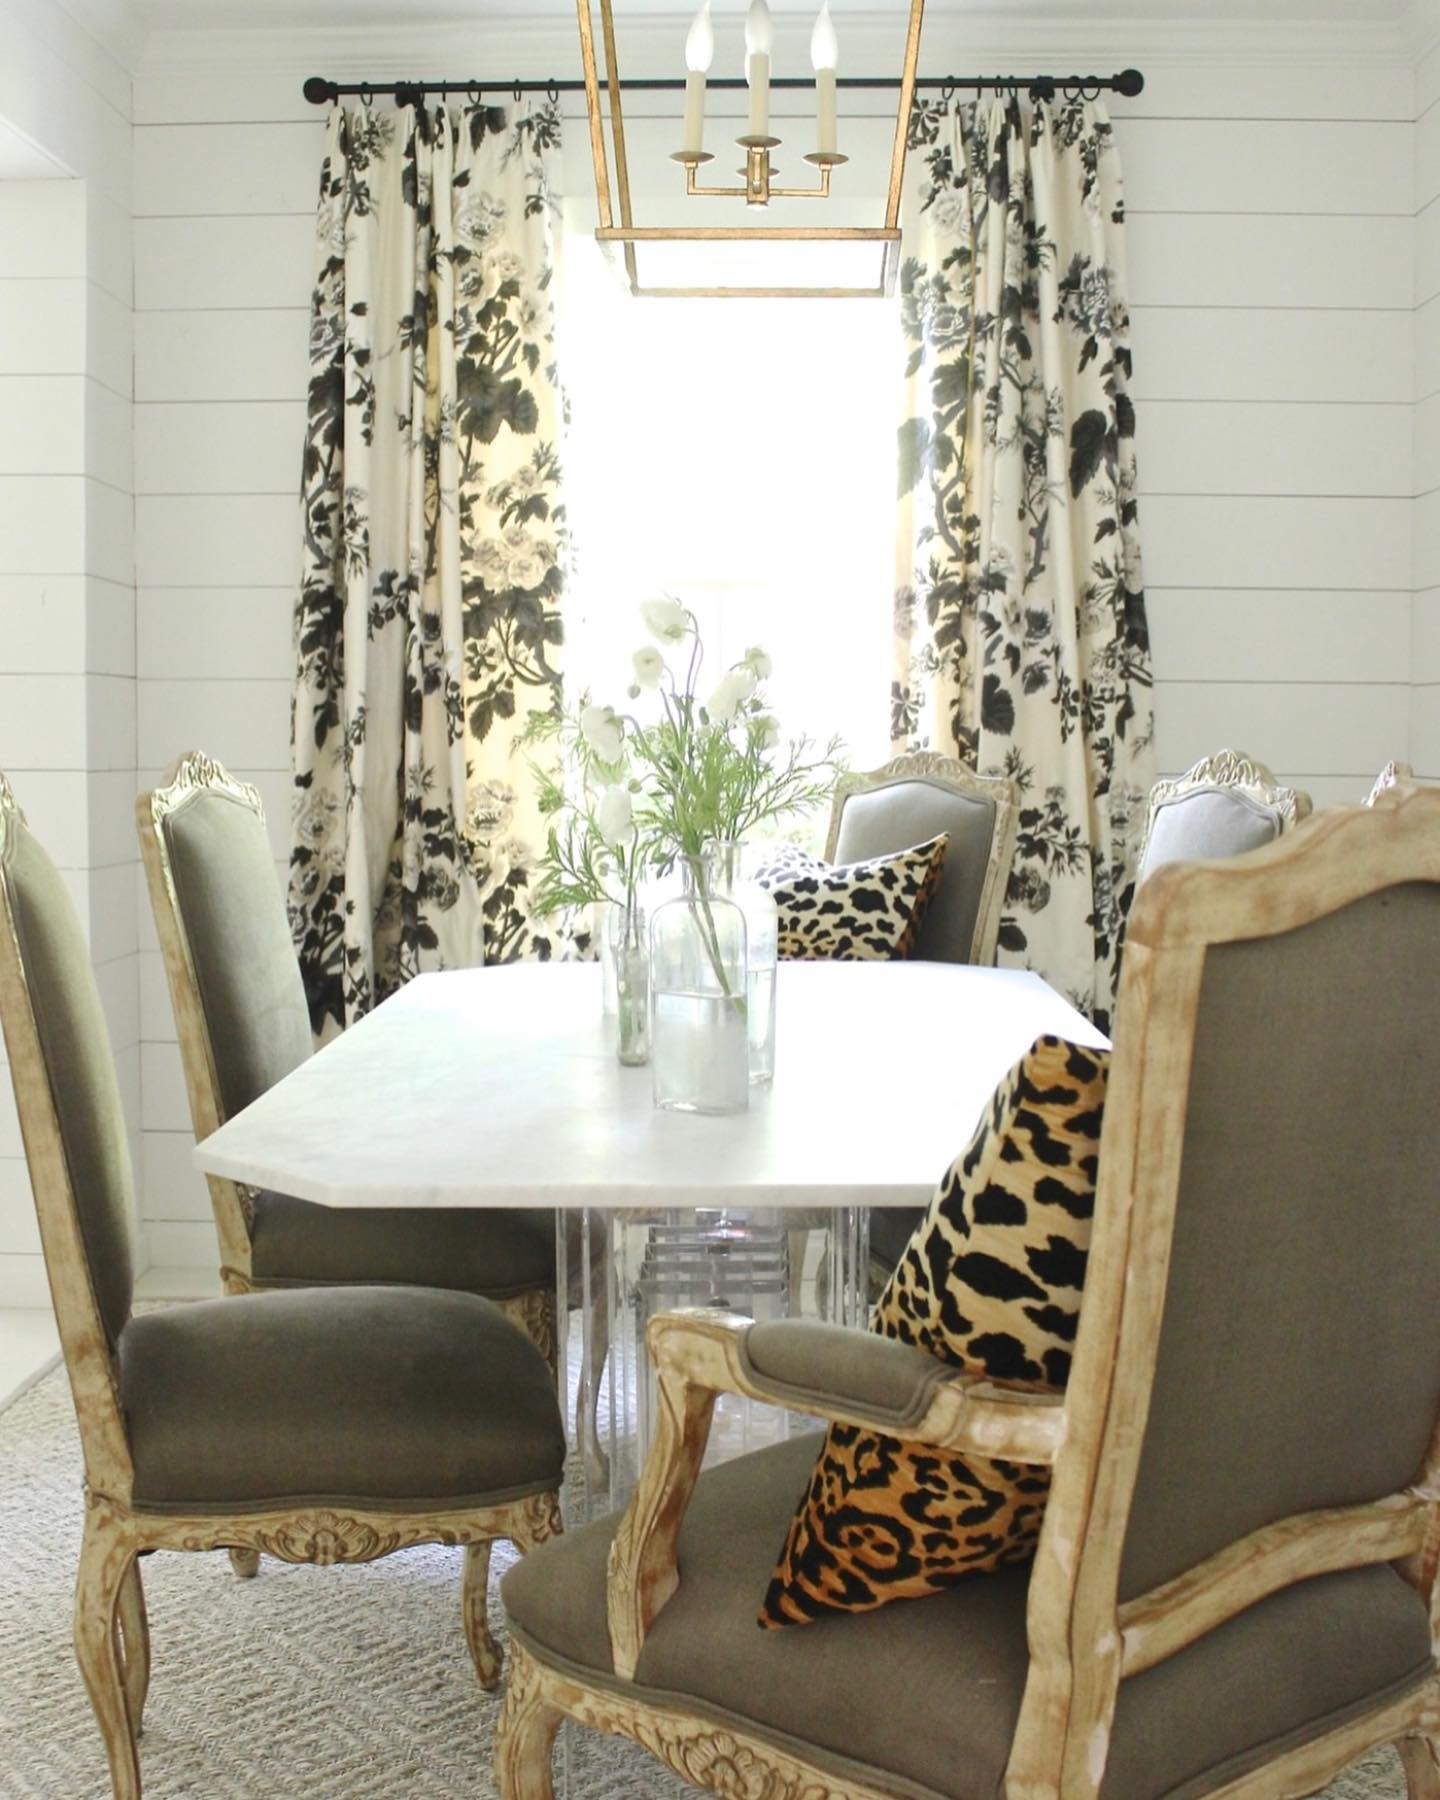 Beautiful dining room with Schumacher Pyne Hollyhock curtins and neutral colors - Sherry Hart designed. #diningrooms #pynehollyhock ##schumacher1889fabrics